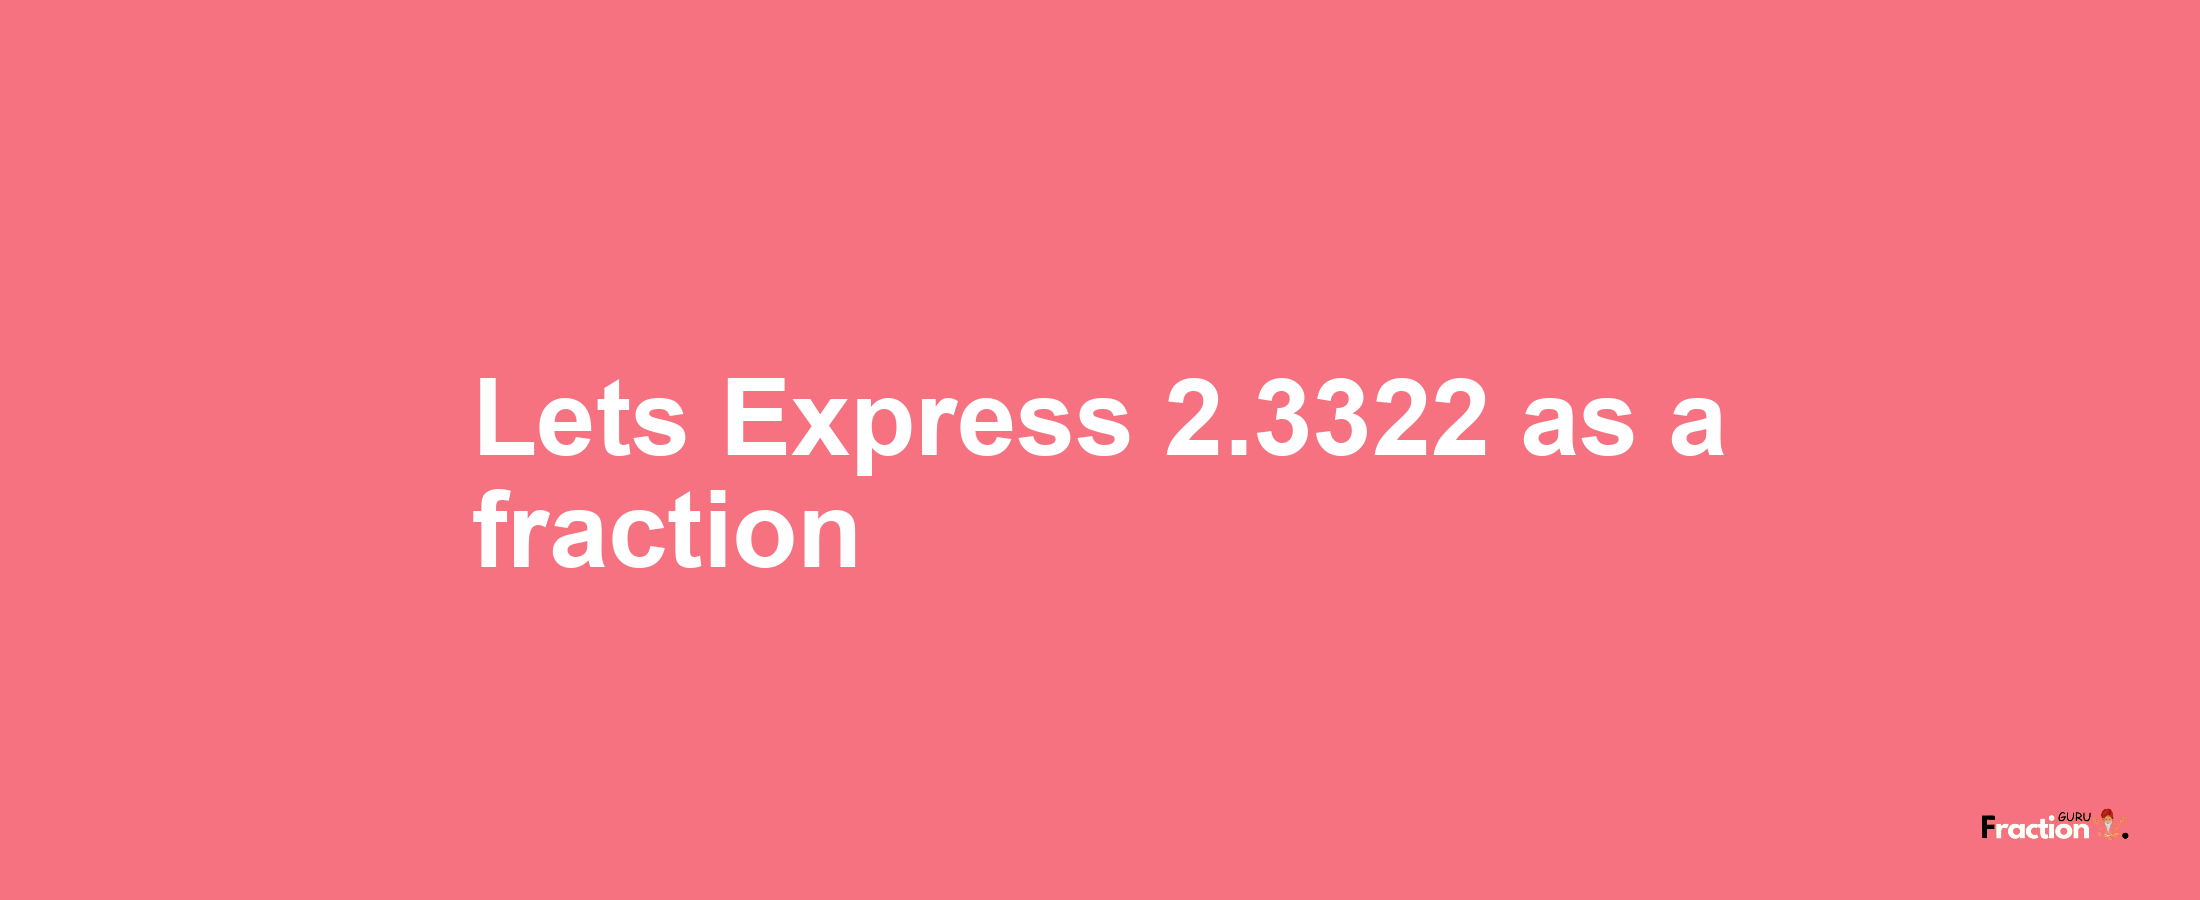 Lets Express 2.3322 as afraction